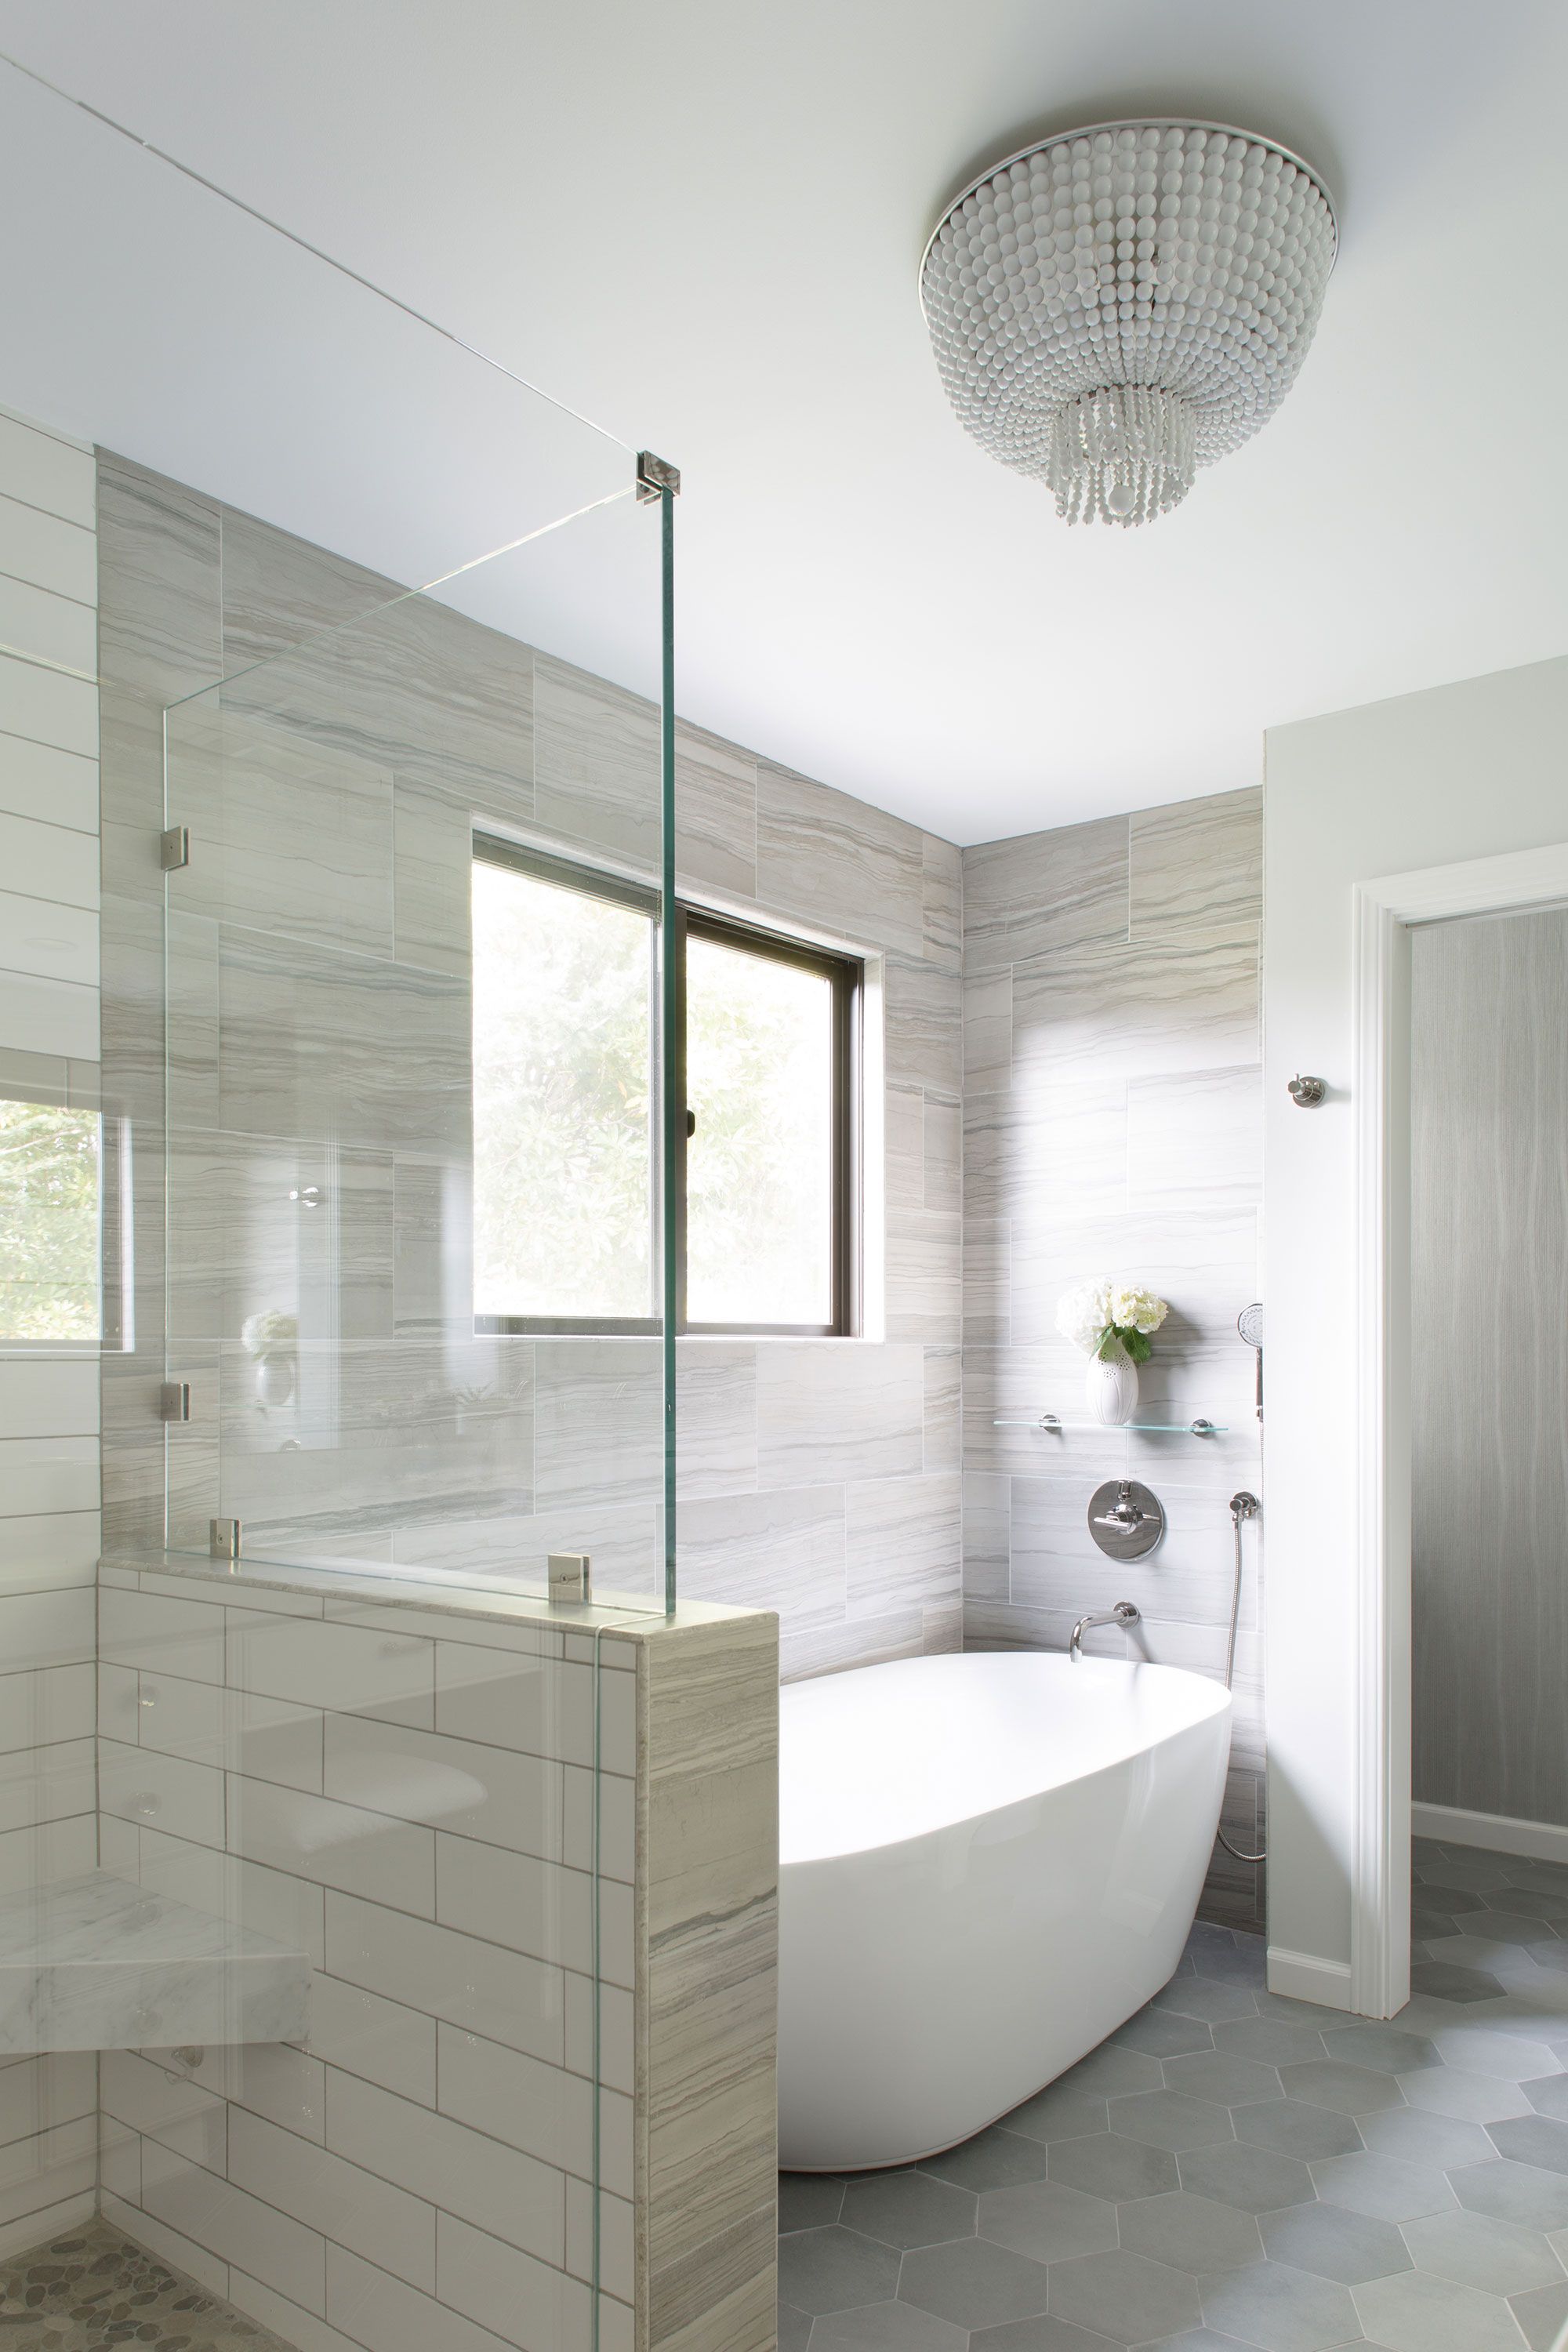 Master Bathroom Ideas With Freestanding Tub - Goimages City